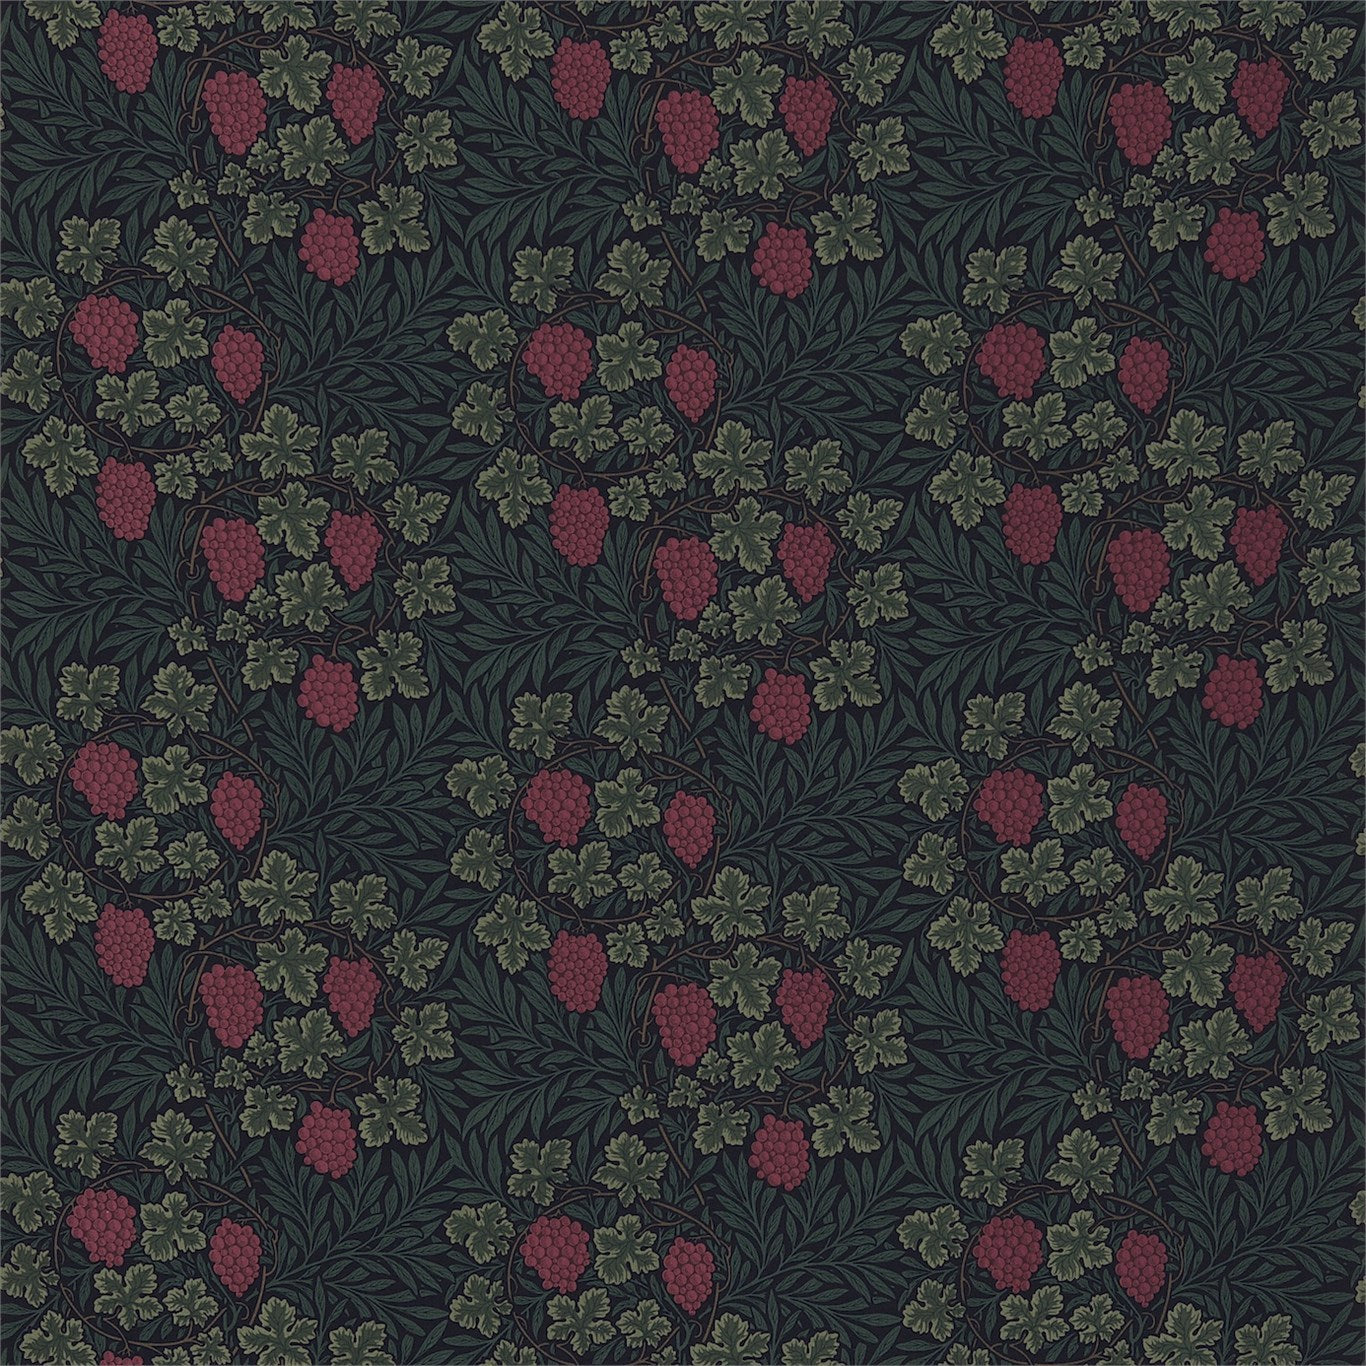 Vine Fabric by Morris & Co.